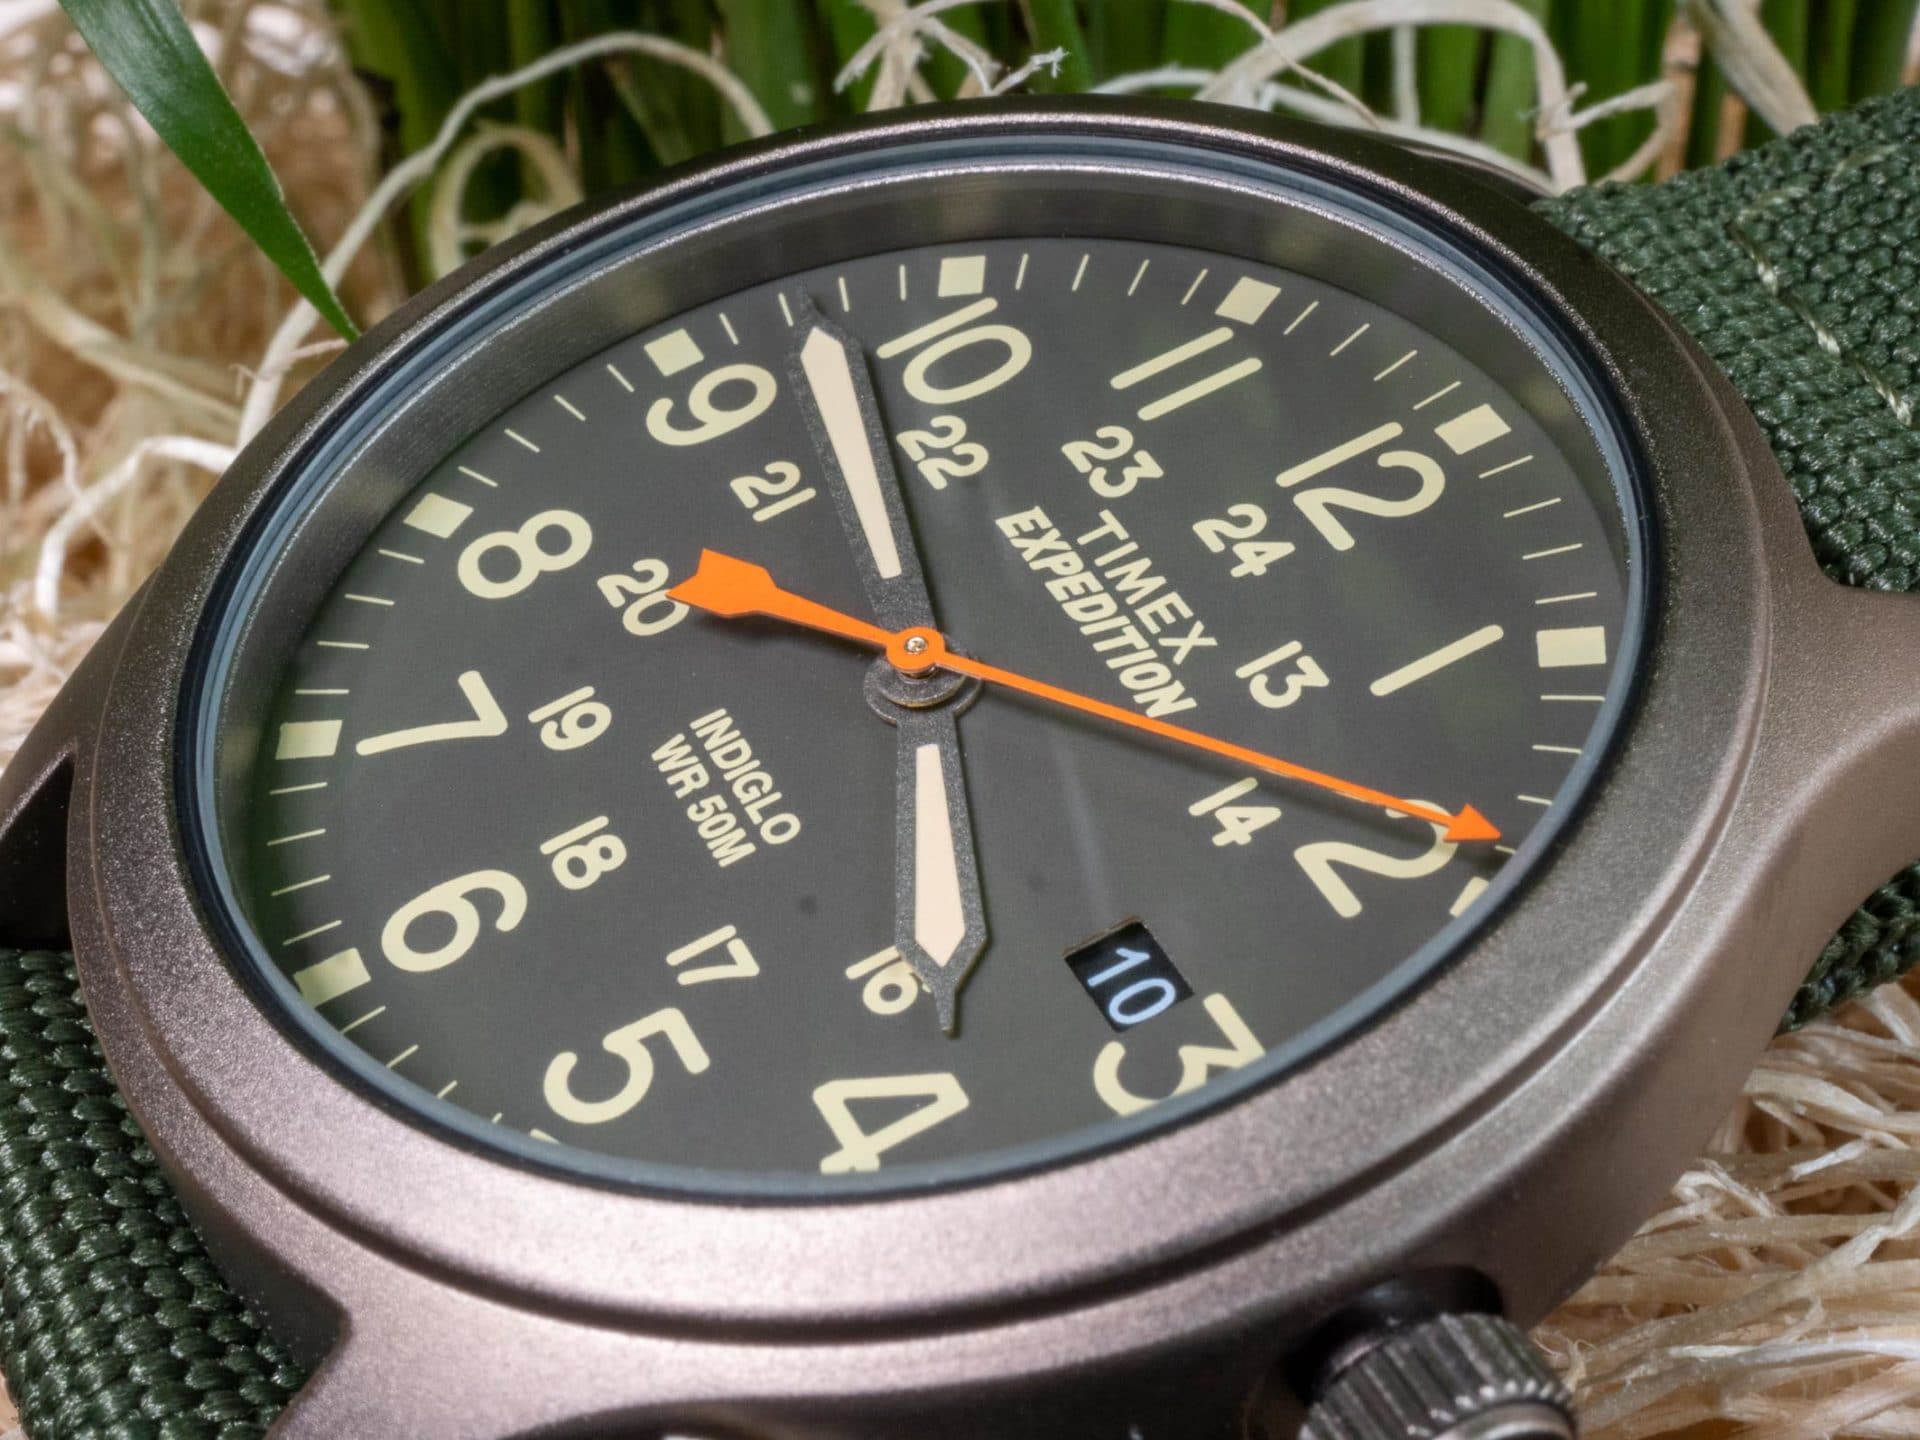 Timex Expedition TW4B13900 hand set